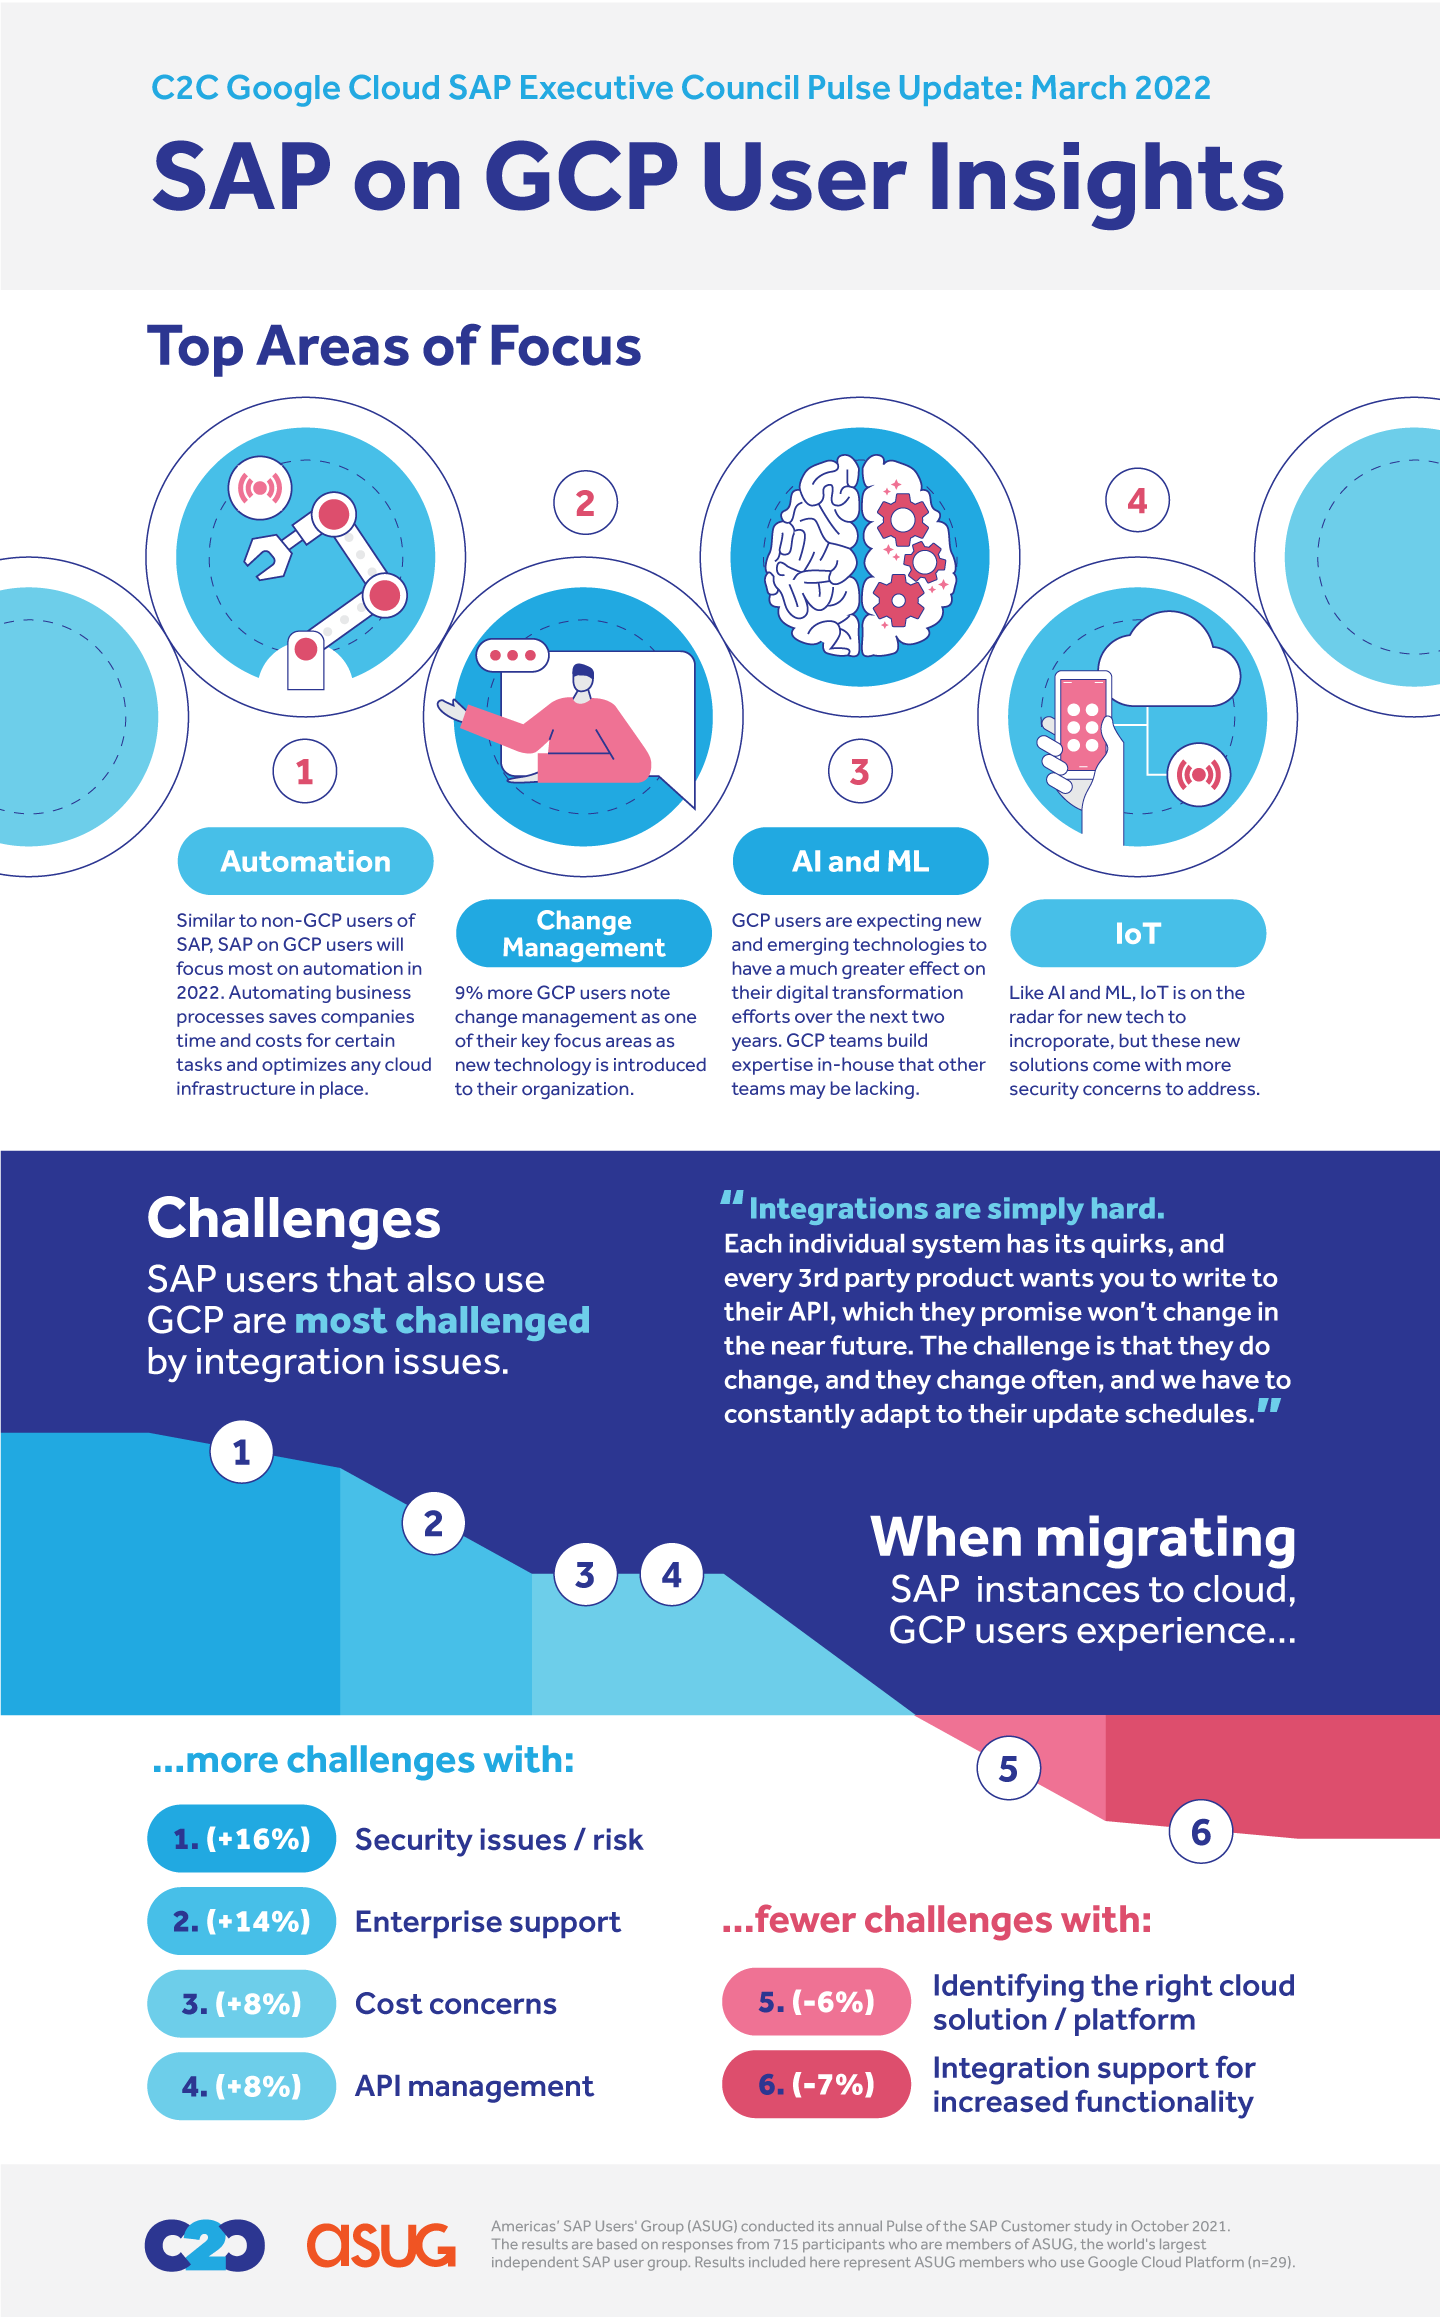 Infographic with information on focus areas and challenges of SAP on GCP users.